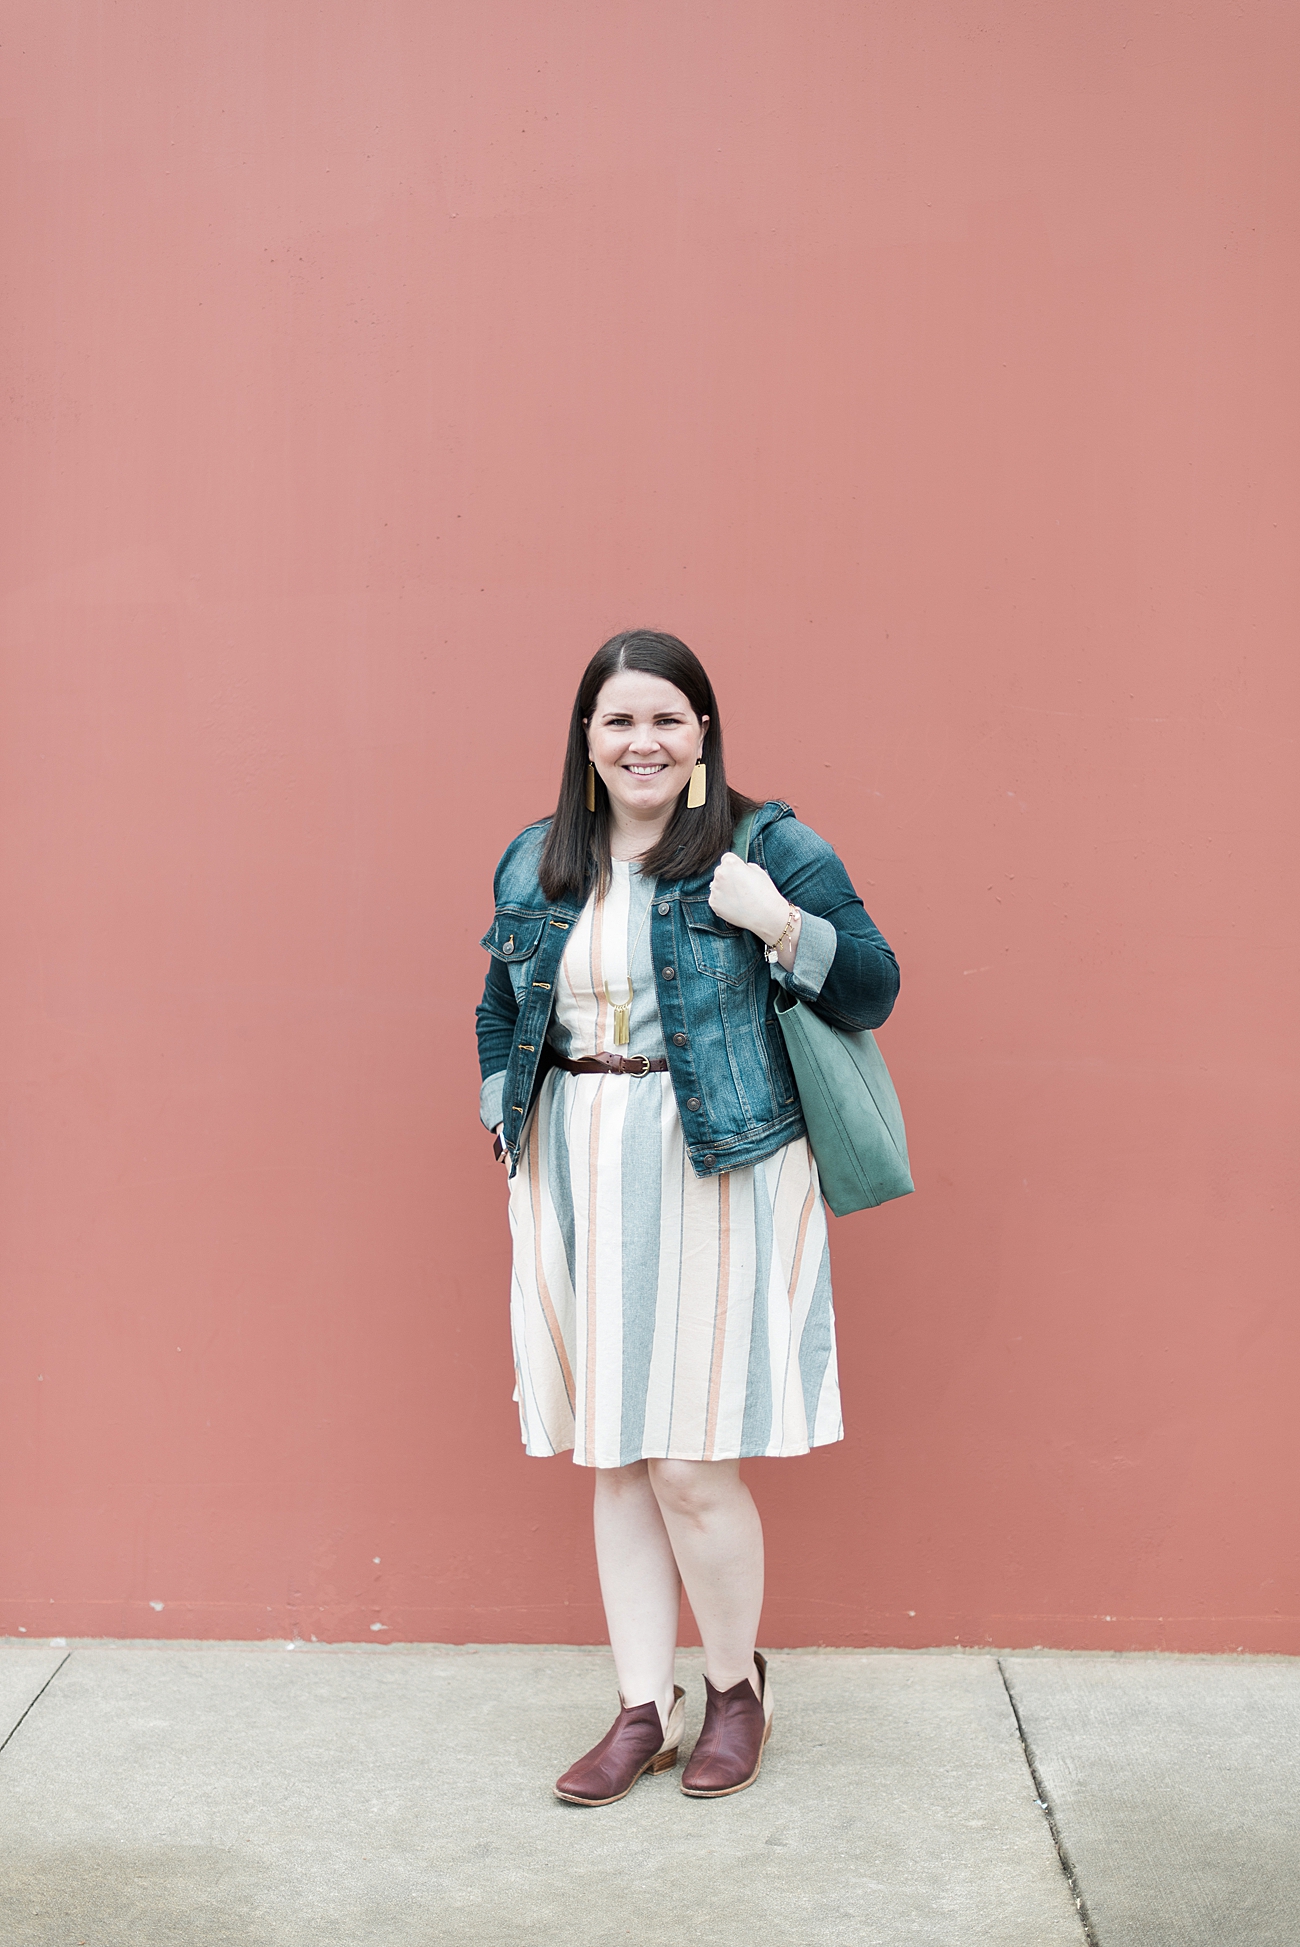 Fair Trade Fashion Blogger - Spring 2019 - Mata Traders Lovely Lines Dress Pastel Stripes, The Root Collective Lee Boots in Merlot, Rover & Kin necklace, Tribe Alive tote, Nickel & Suede earrings, denim jacket (4)